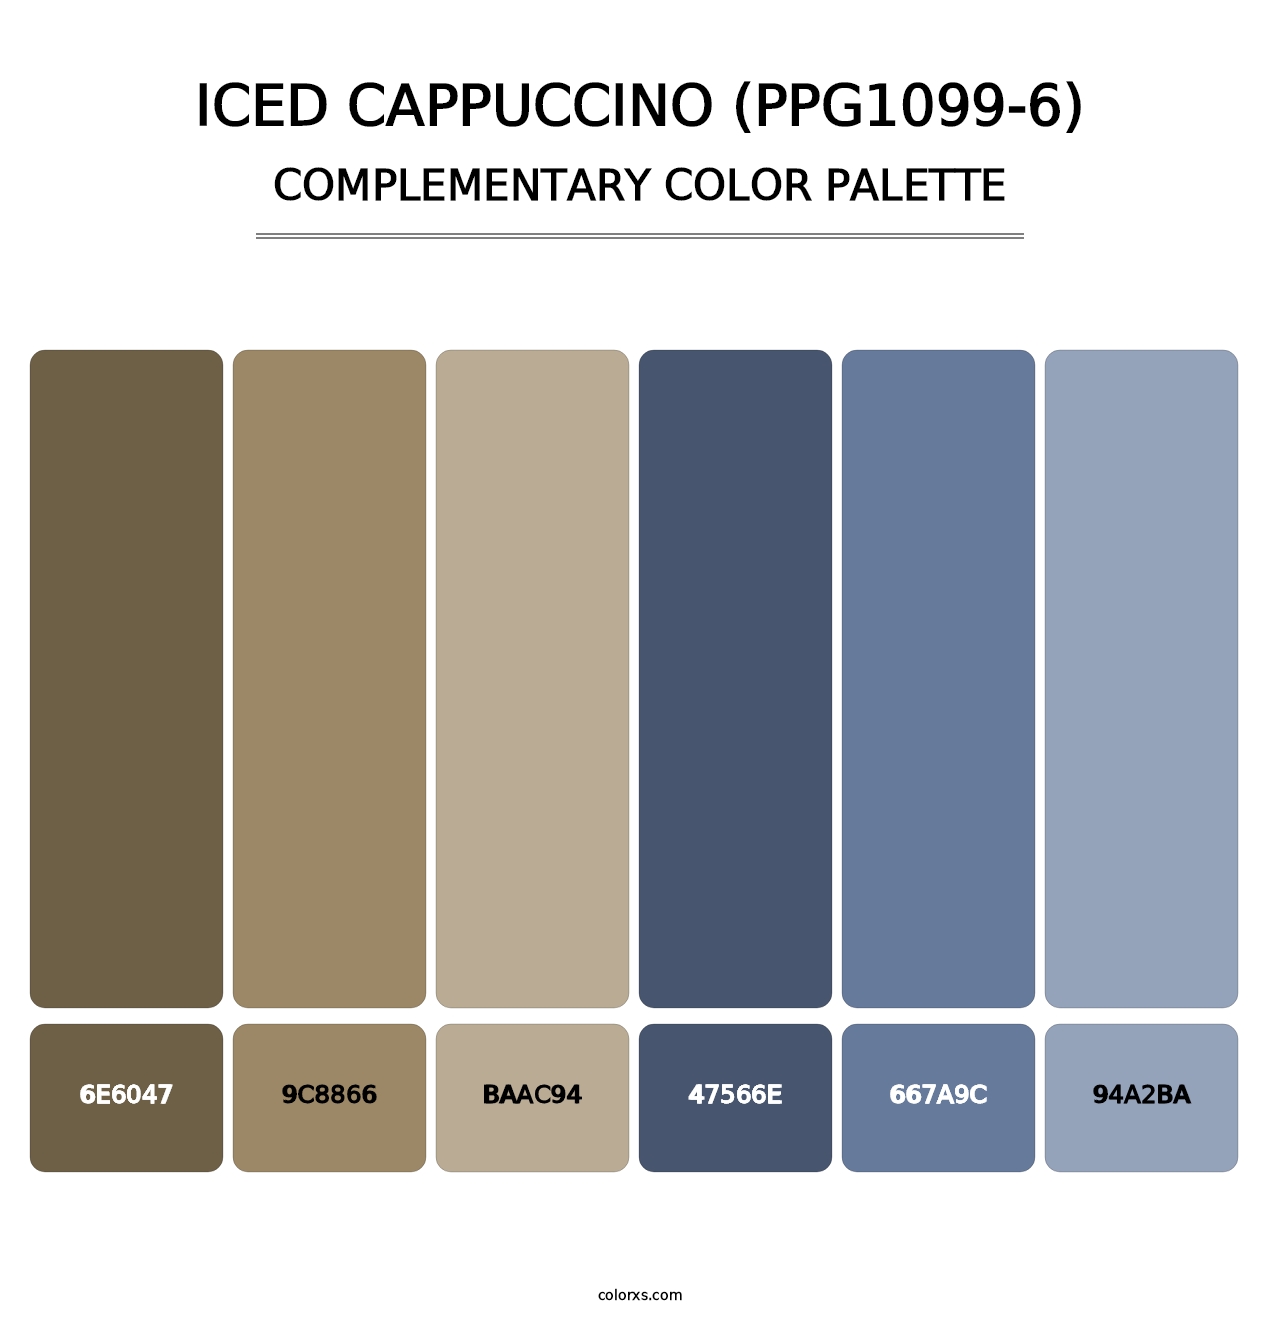 Iced Cappuccino (PPG1099-6) - Complementary Color Palette